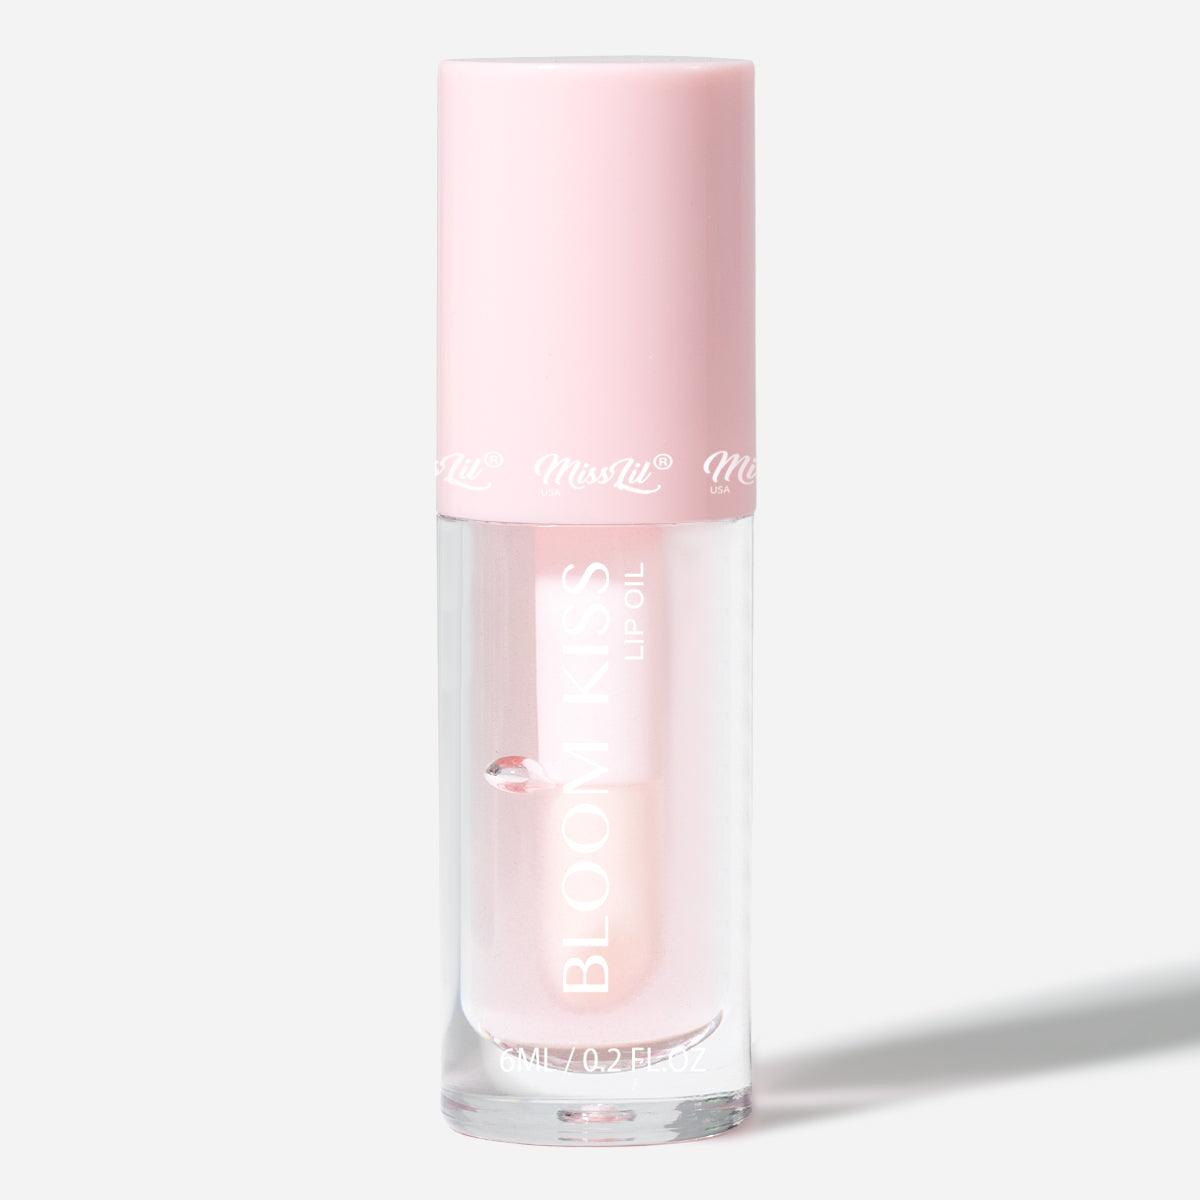 rose lip oil for hydration